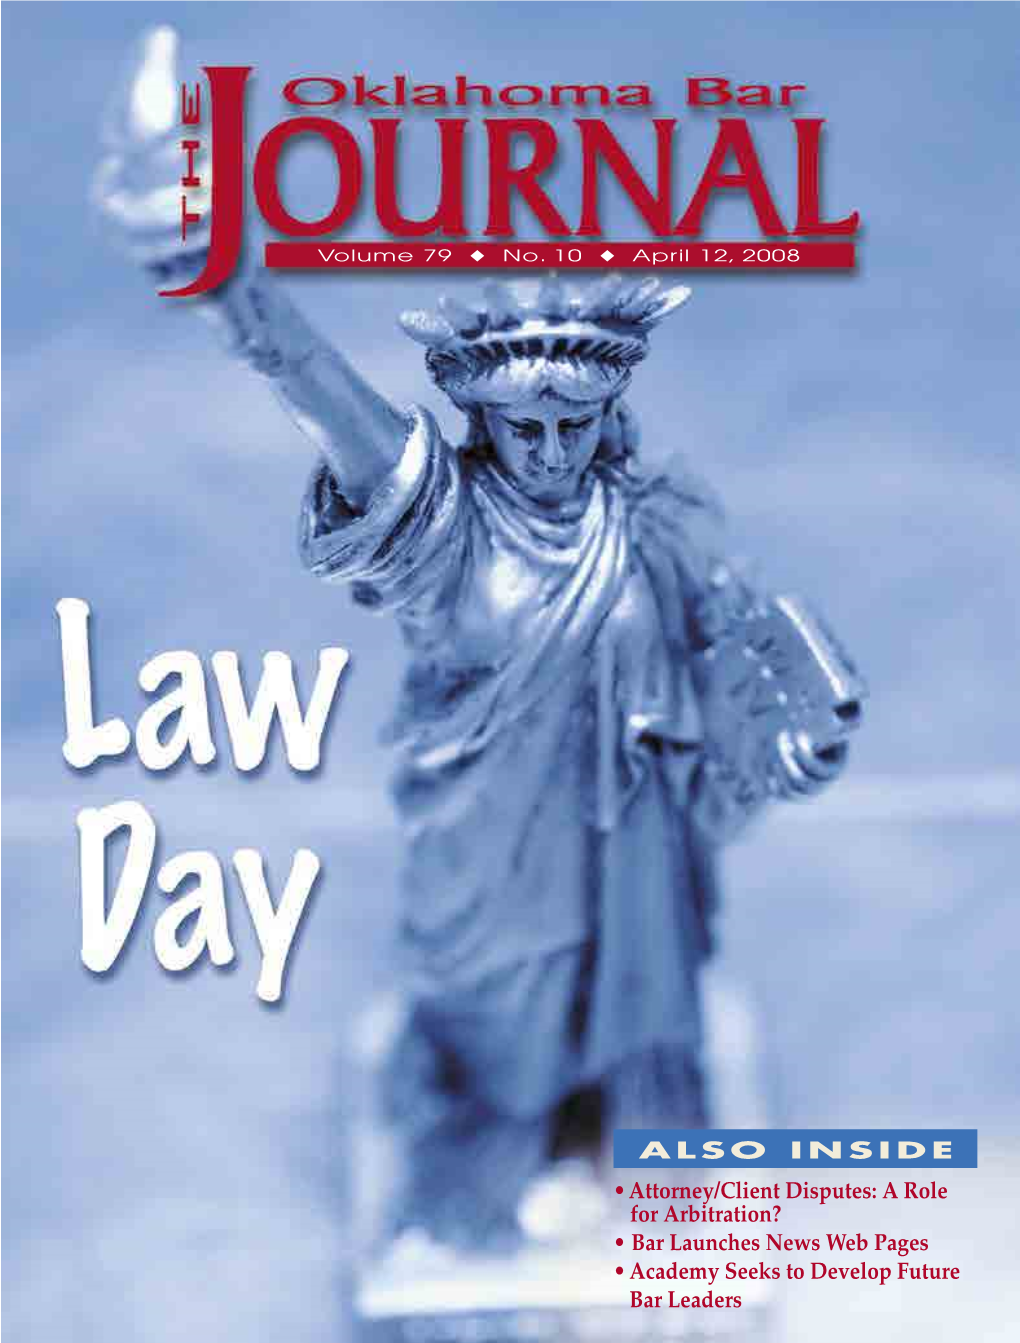 Attorney/Client Disputes: a Role for Arbitration? • Bar Launches News Web Pages Vol